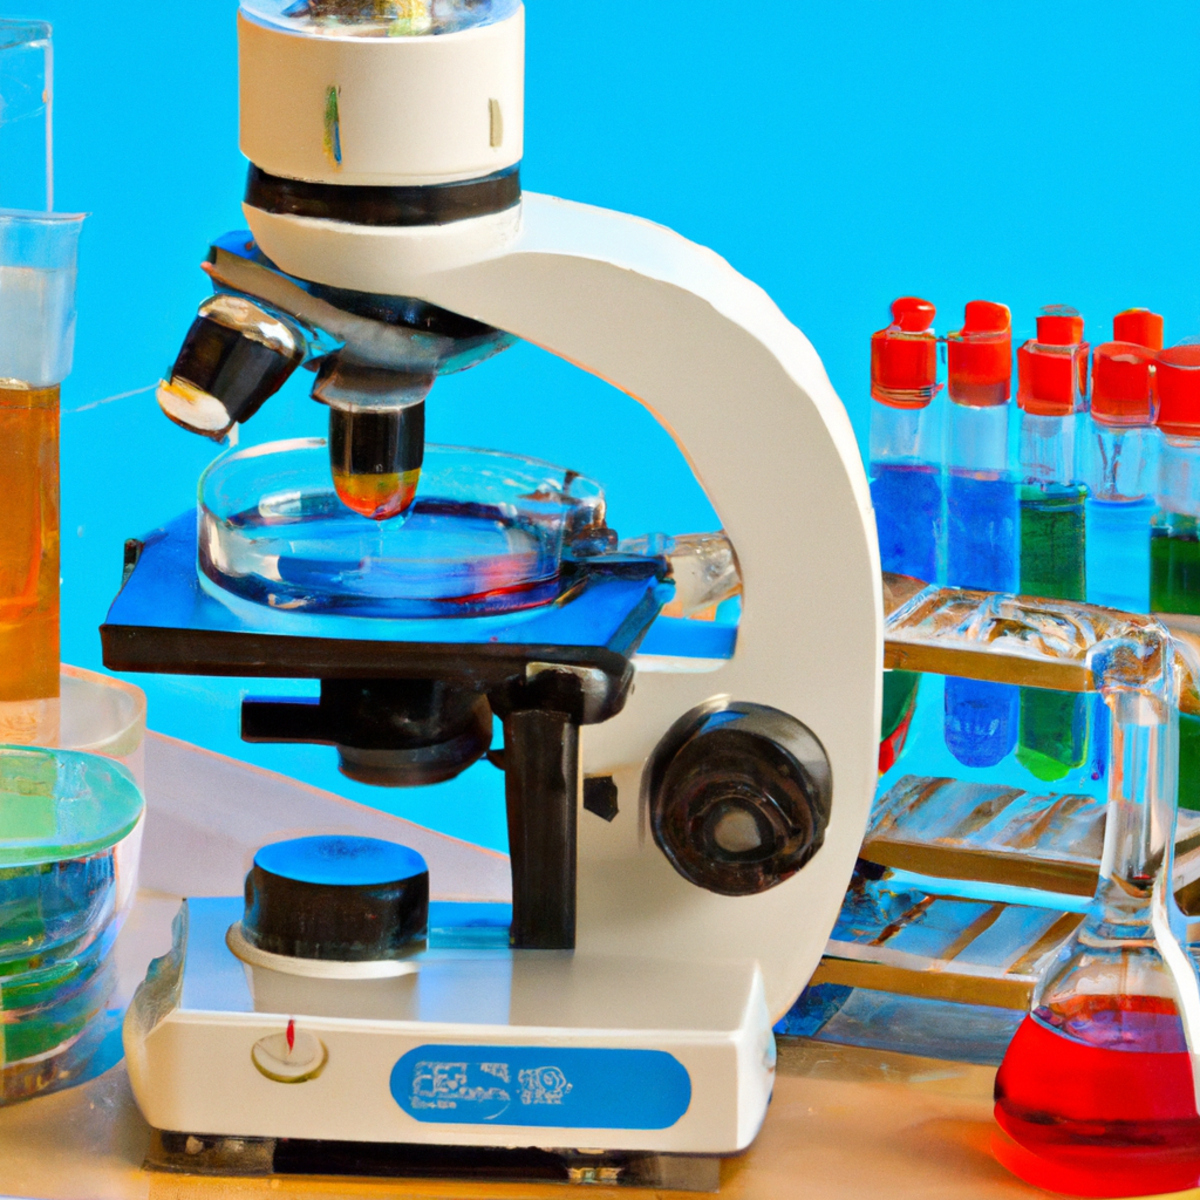 Scientific laboratory scene with research bench, instruments, and petri dish symbolizing investigation of Lesch-Nyhan Syndrome.